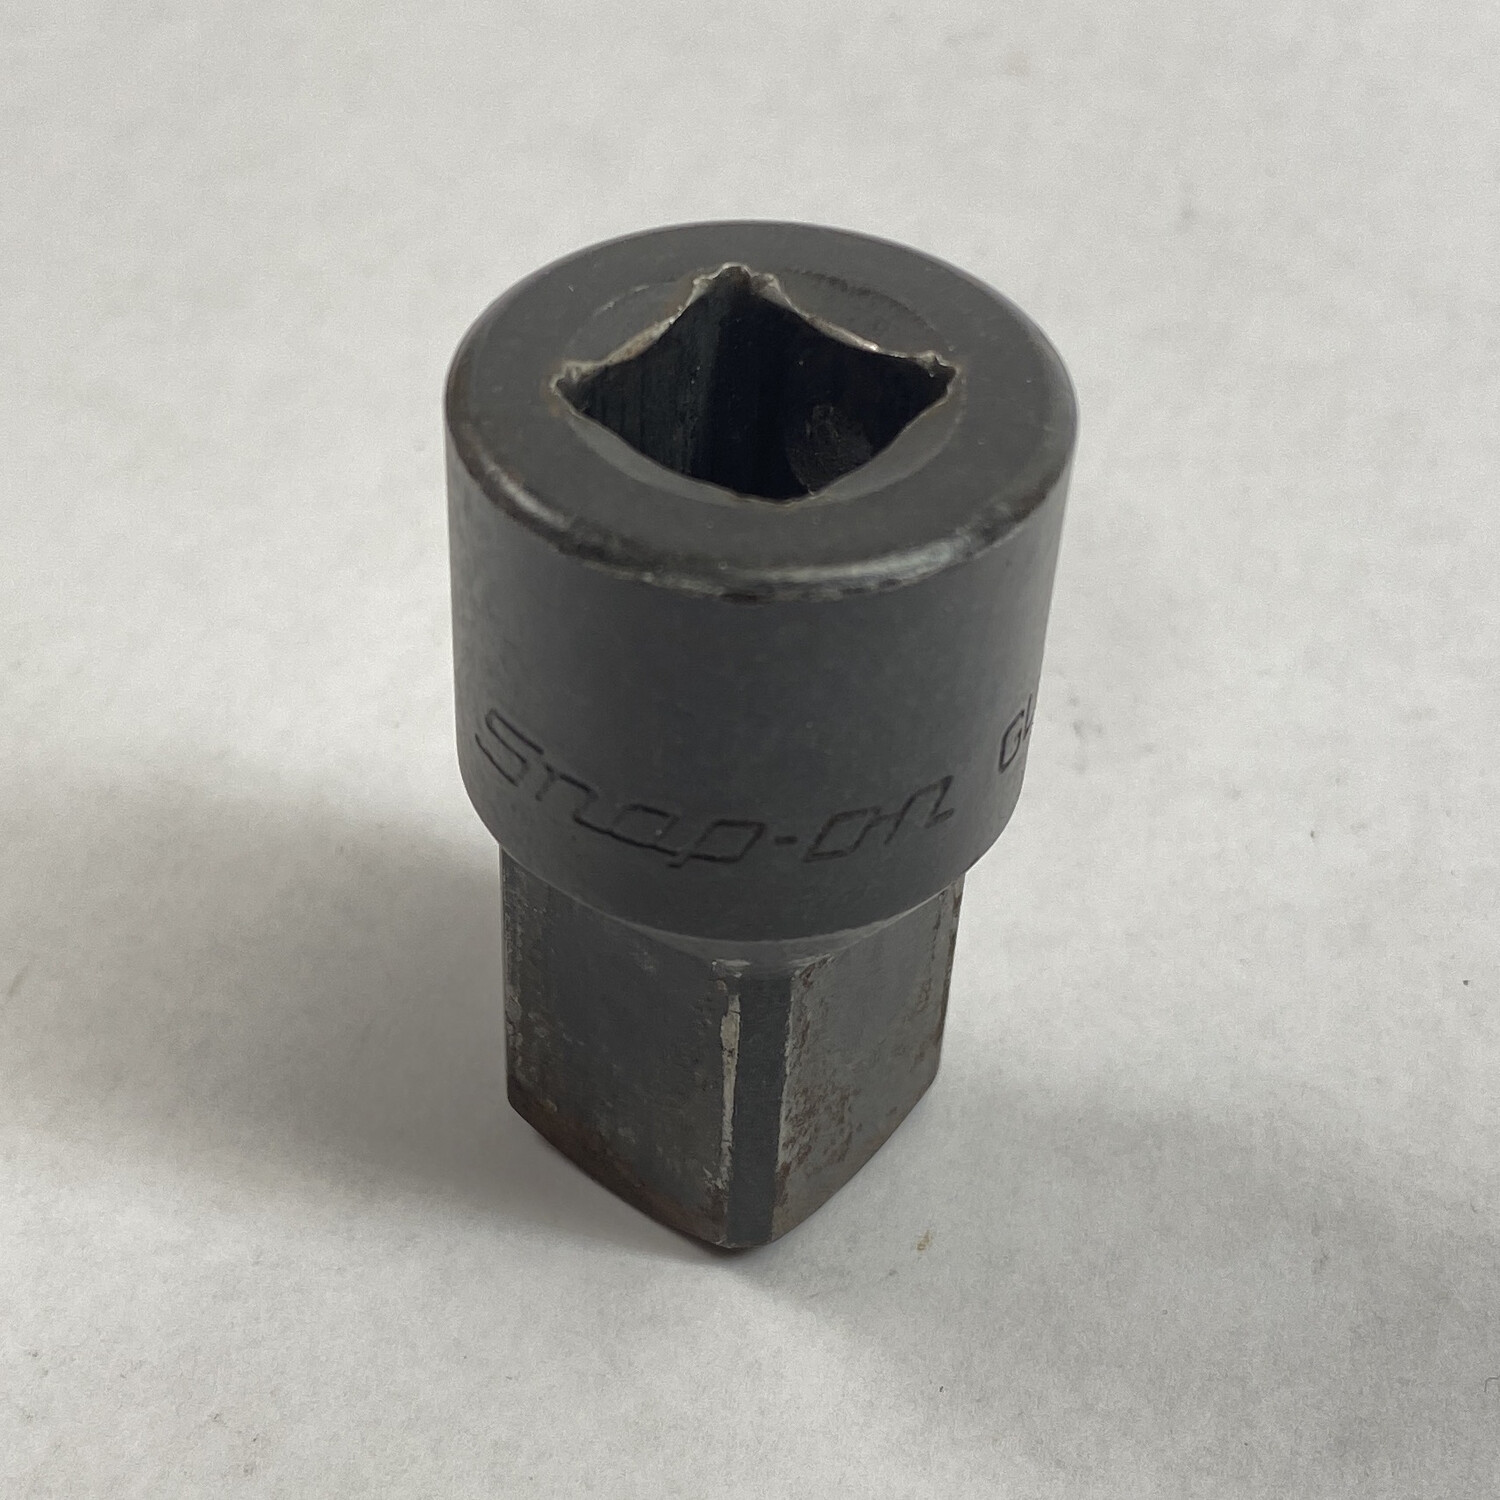 Snap On 1/2” Drive To 3/4” Drive Impact Adapter, GLA12B